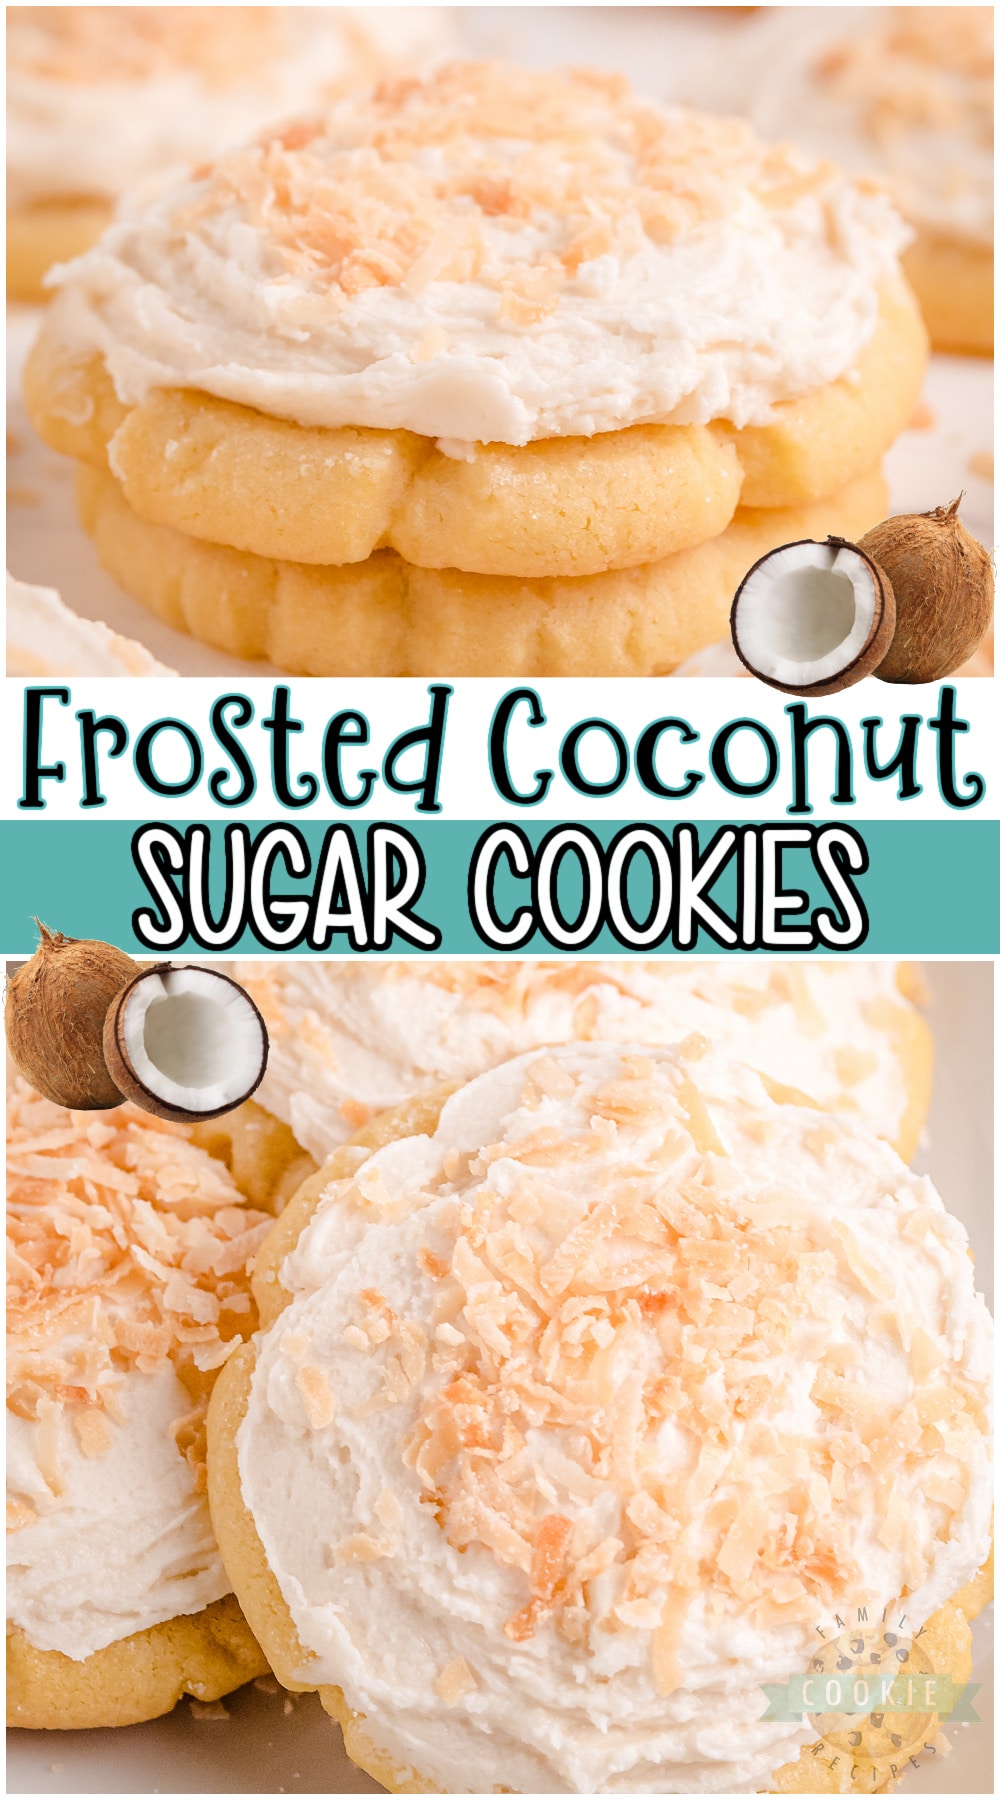 Coconut Sugar Cookies are soft cookies with a lovely coconut flavor! Frosted with a coconut buttercream & topped with toasted coconut for a delicious coconut cookie! #cookie #sugarcookie #coconut #frosted #baking #easyrecipe from FAMILY COOKIE RECIPES via @buttergirls